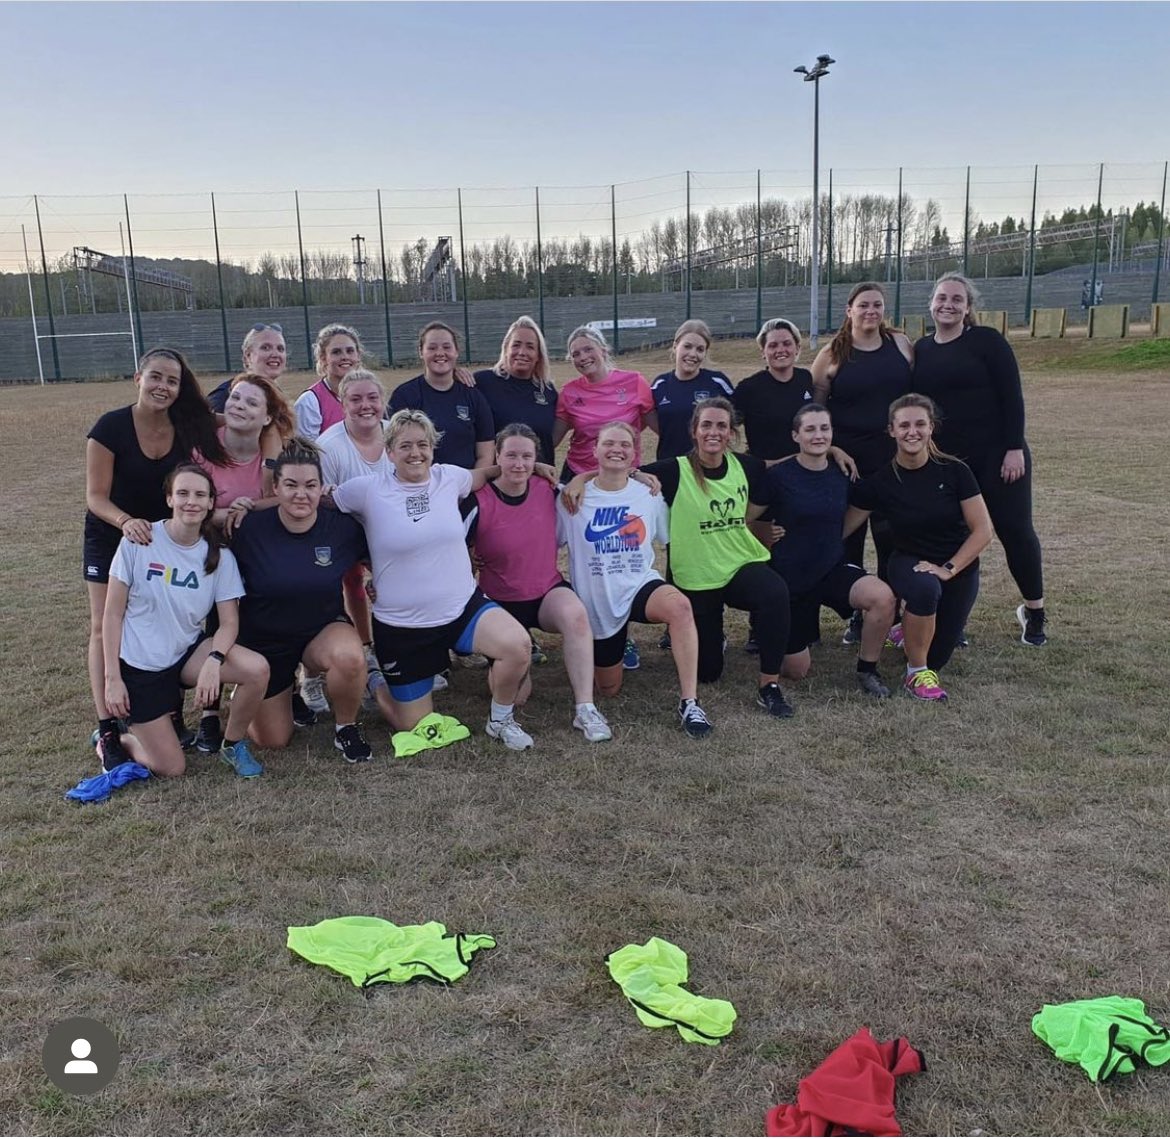 First preseason training ✅ Great turn out ✅ Lots of new and old faces ✅ And most notably the ice cream van will be visiting at the end of training while the weather is good 🍦👌🏻 #folkestoneladiesrfc #womensrugby #rugbylife #preseason #folkestone #rugby